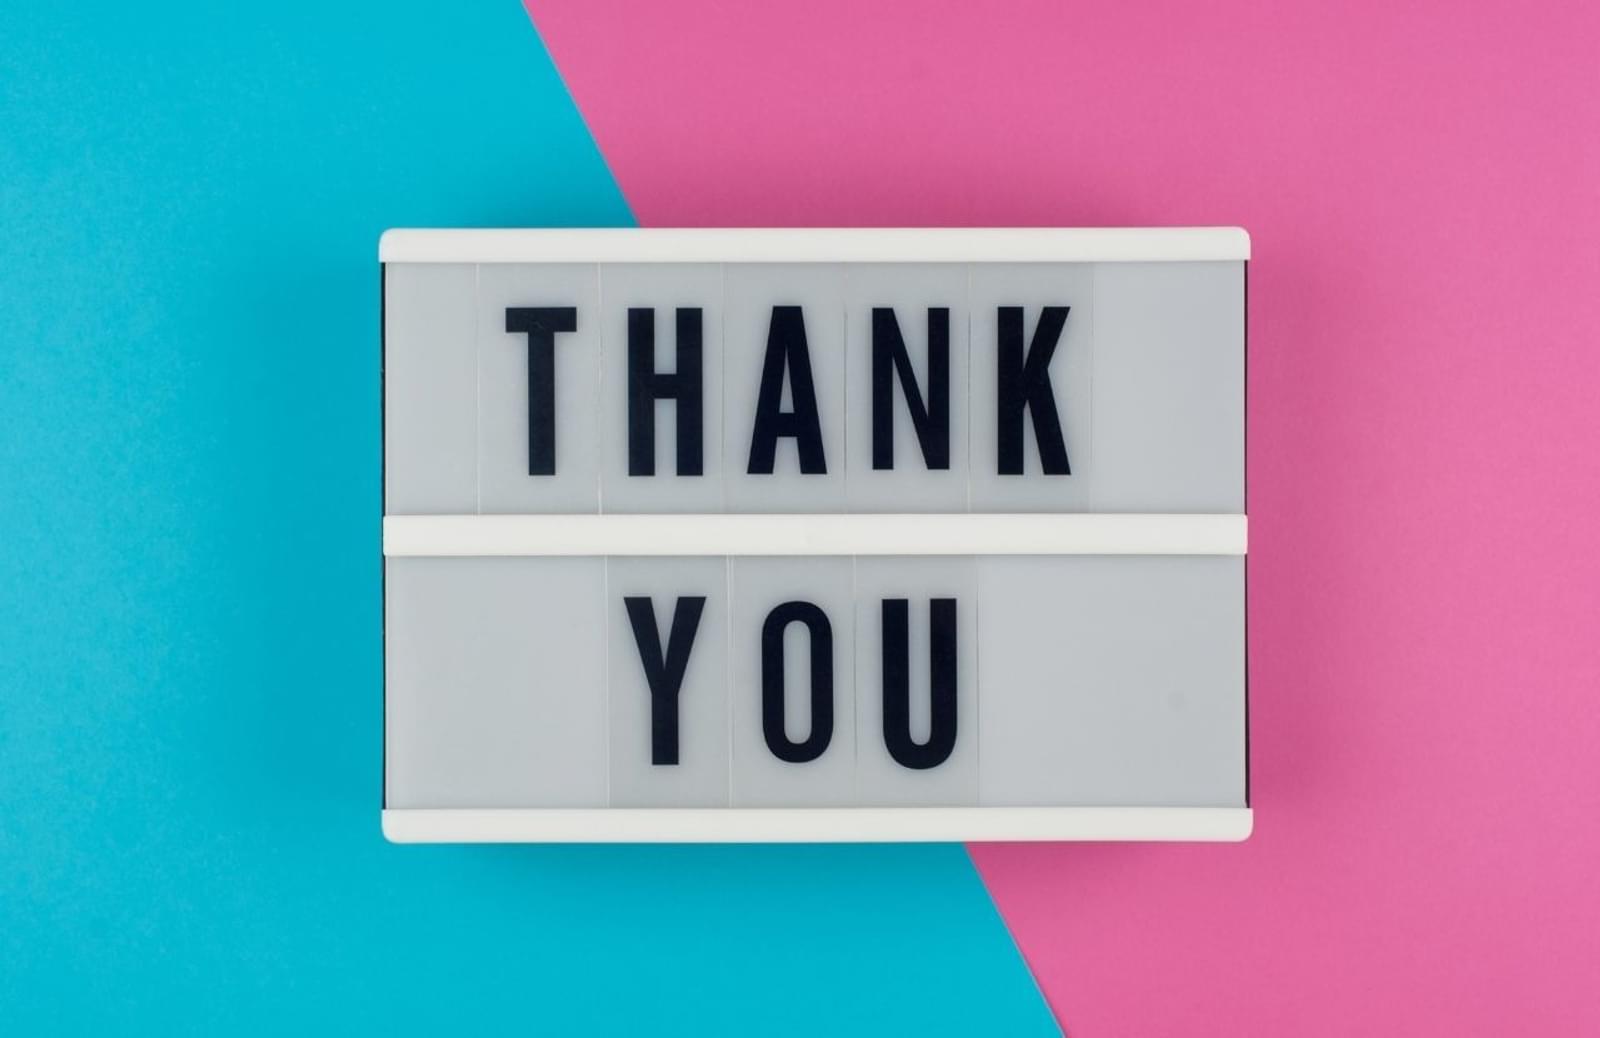 Pink and blue background with a sign saying "thank you"